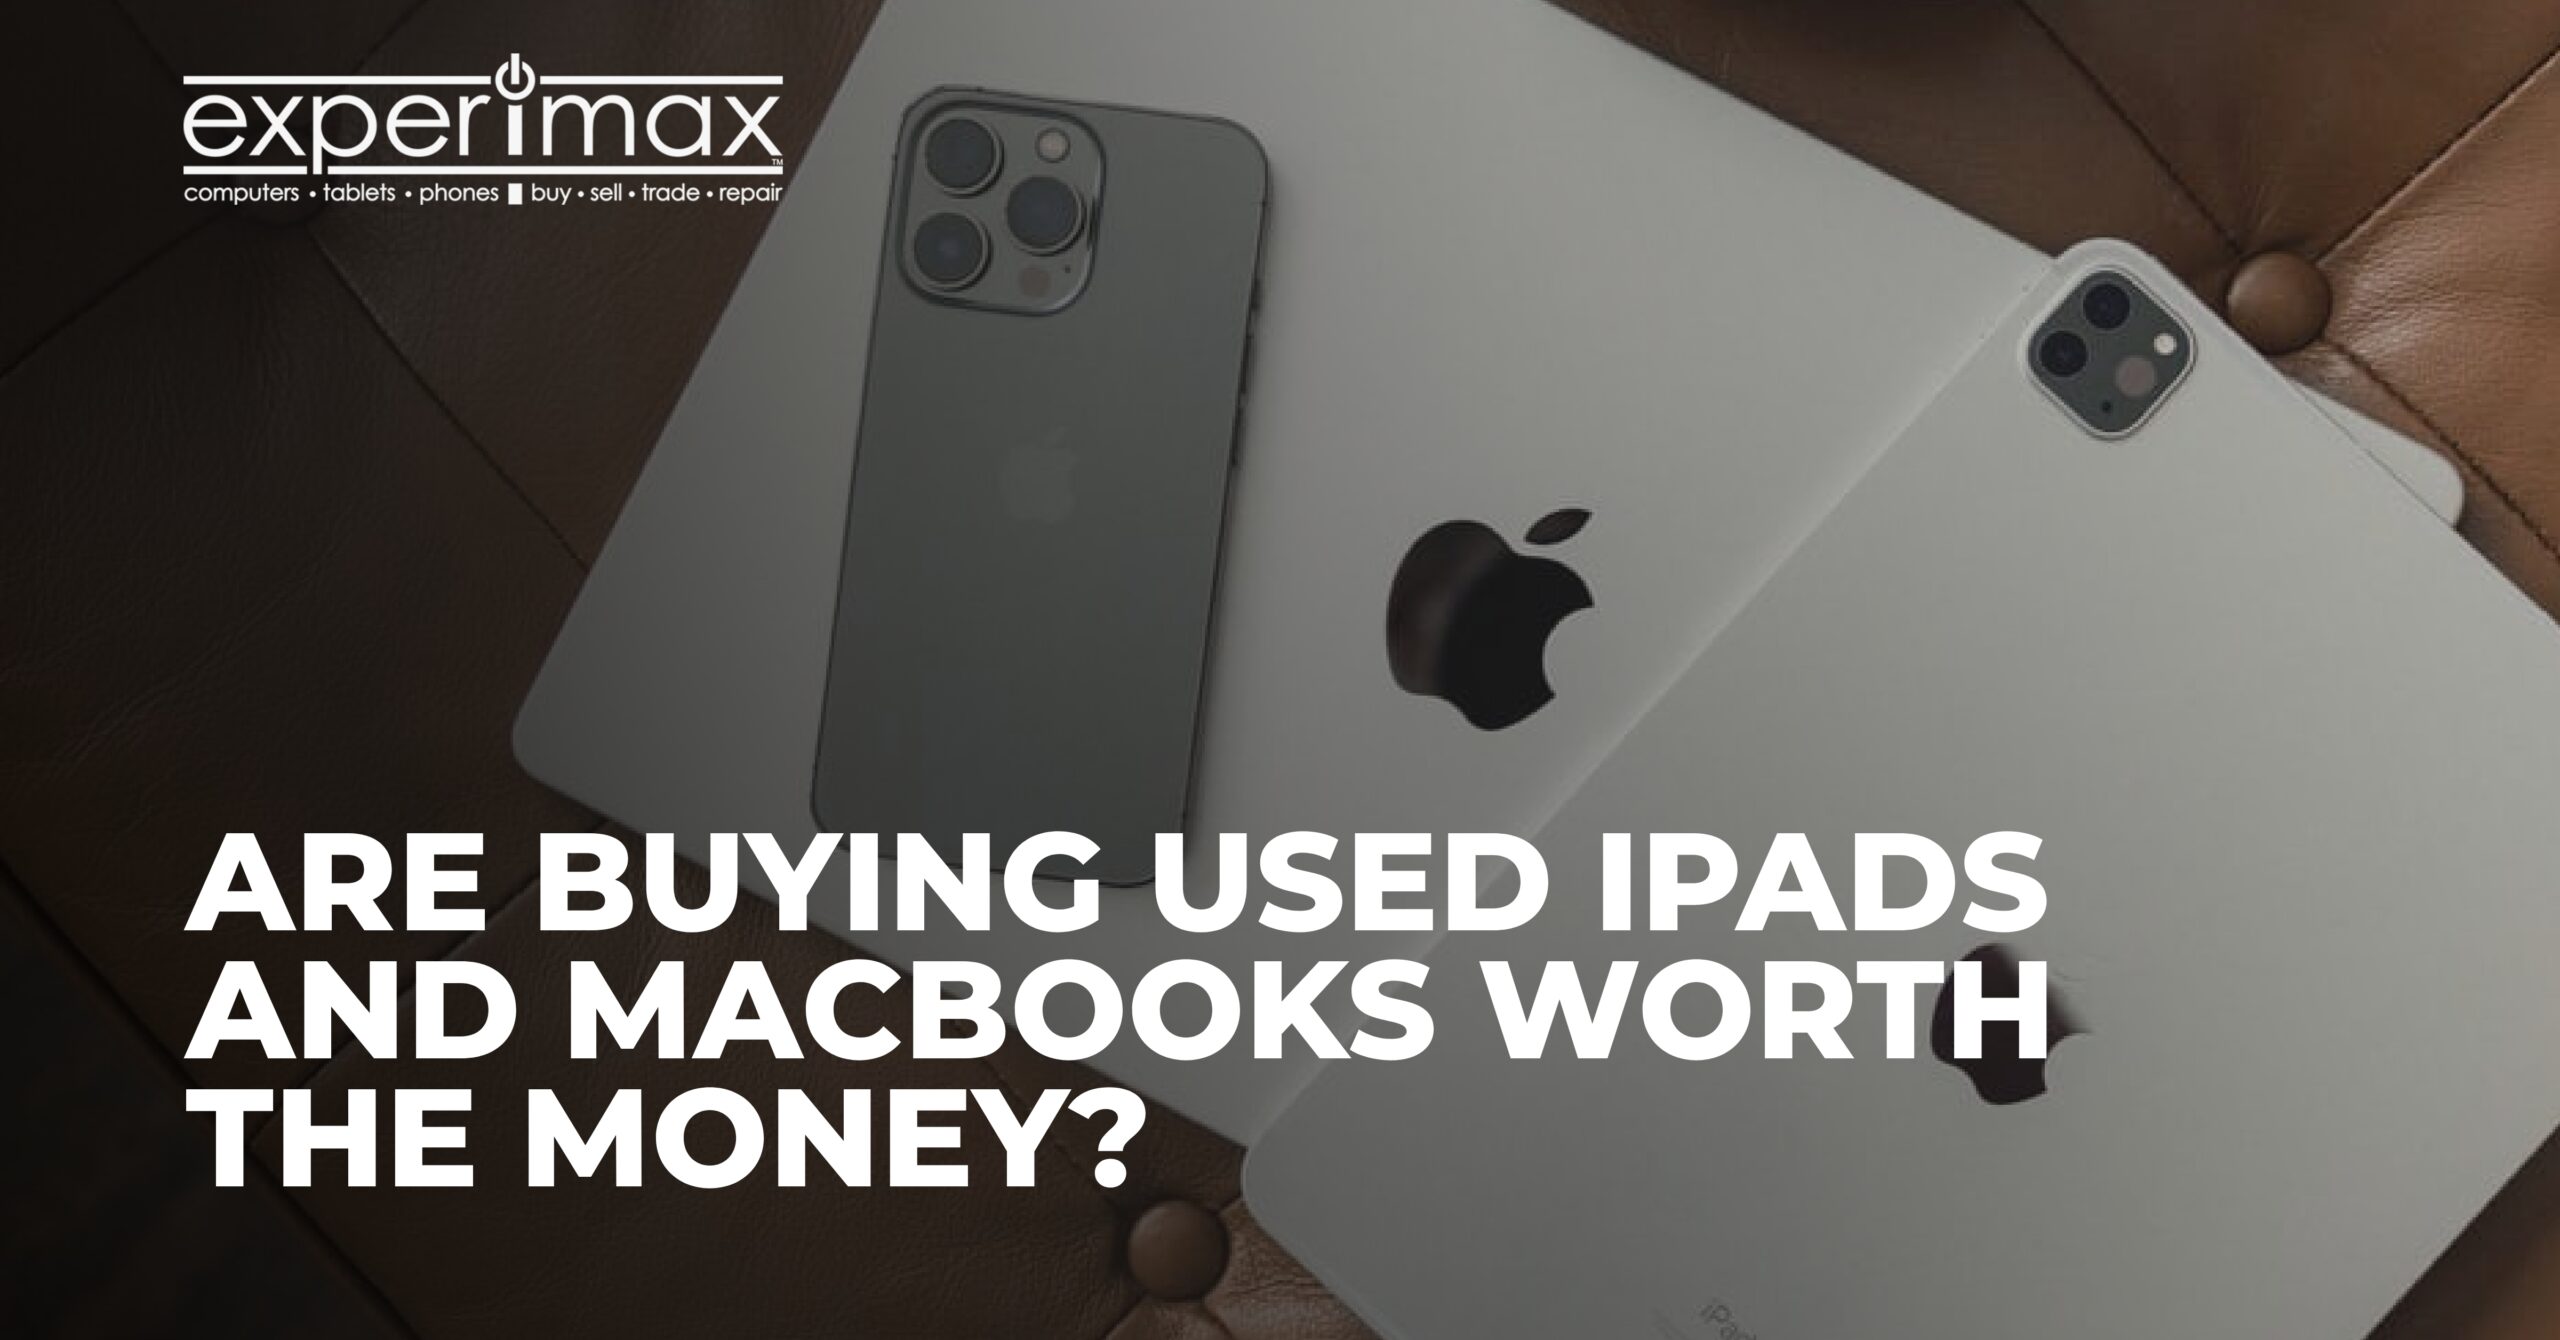 Are Buying Used iPads and MacBooks Worth the Money?